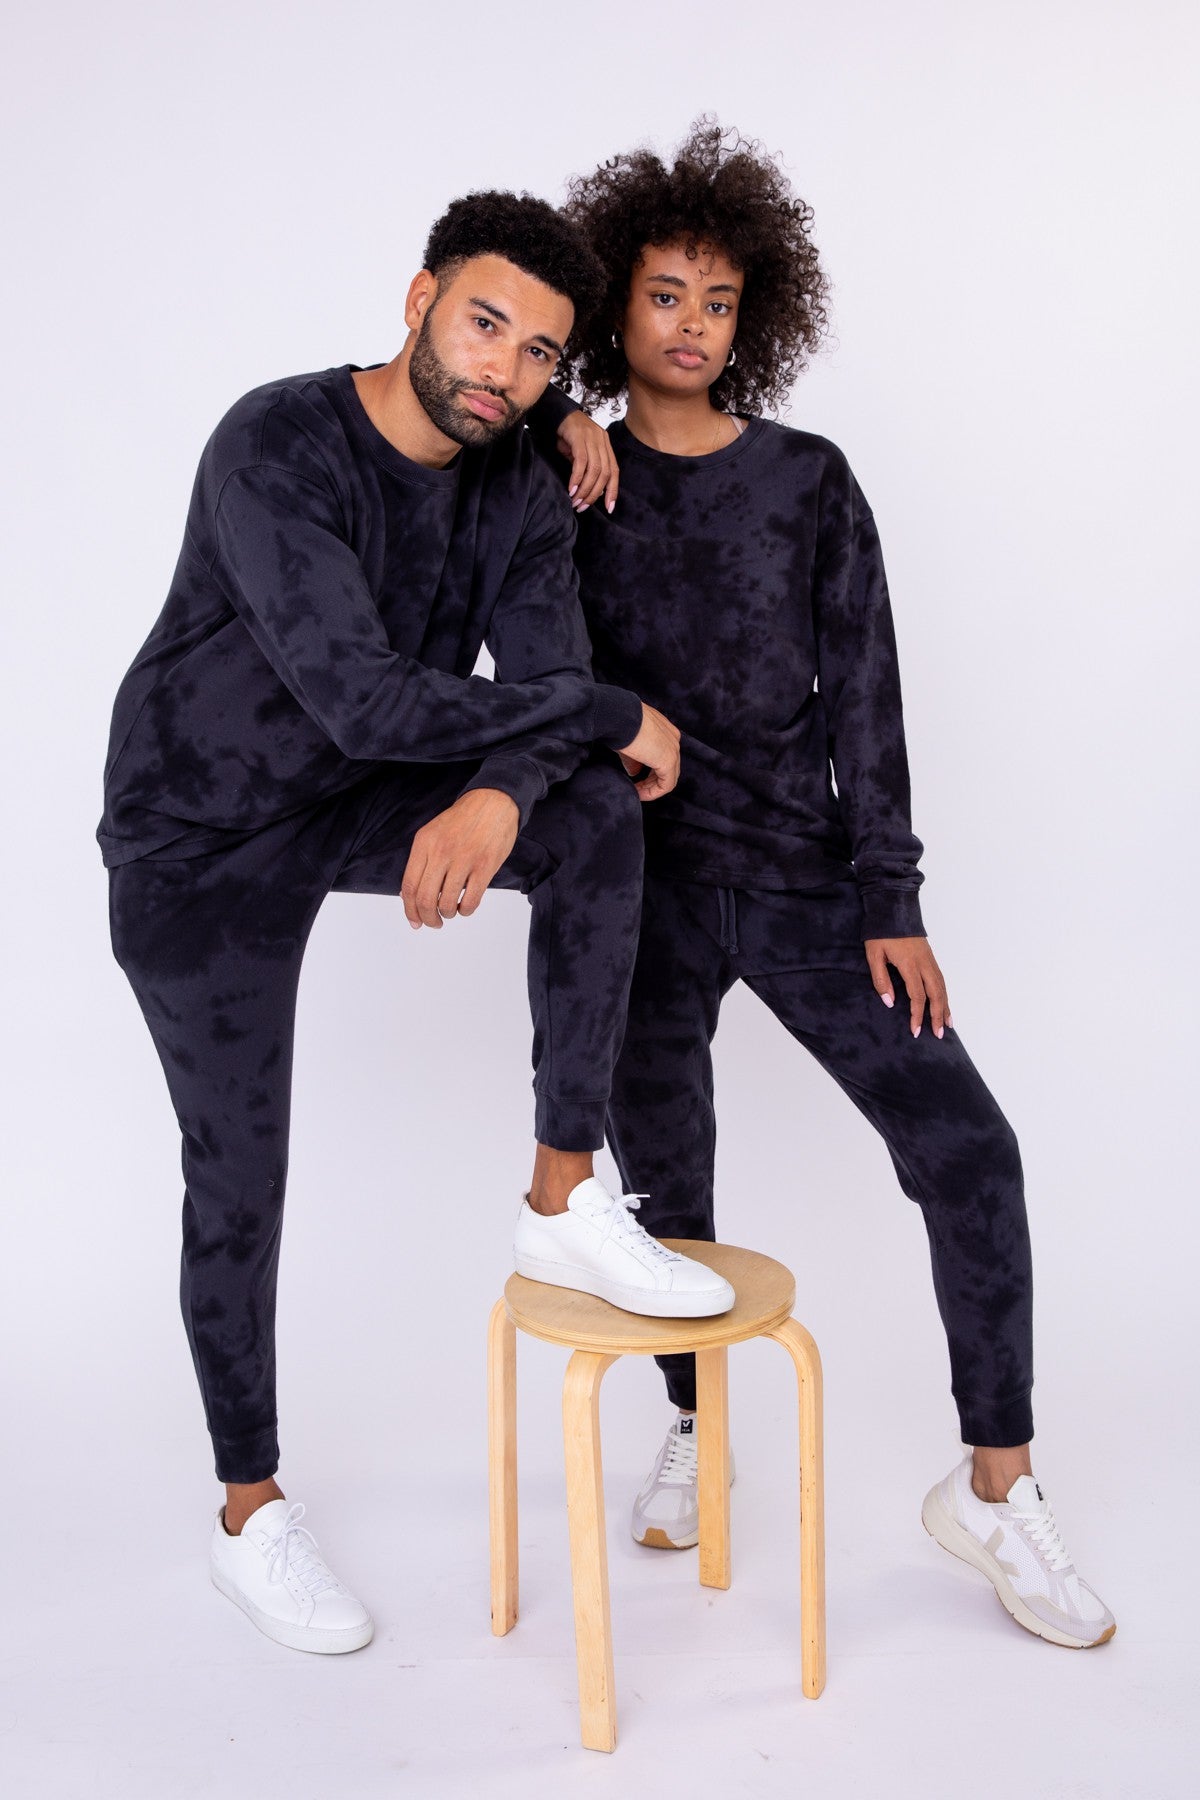 Unisex Dark Grey and Black Tie-Dyed Lounge Street Joggers